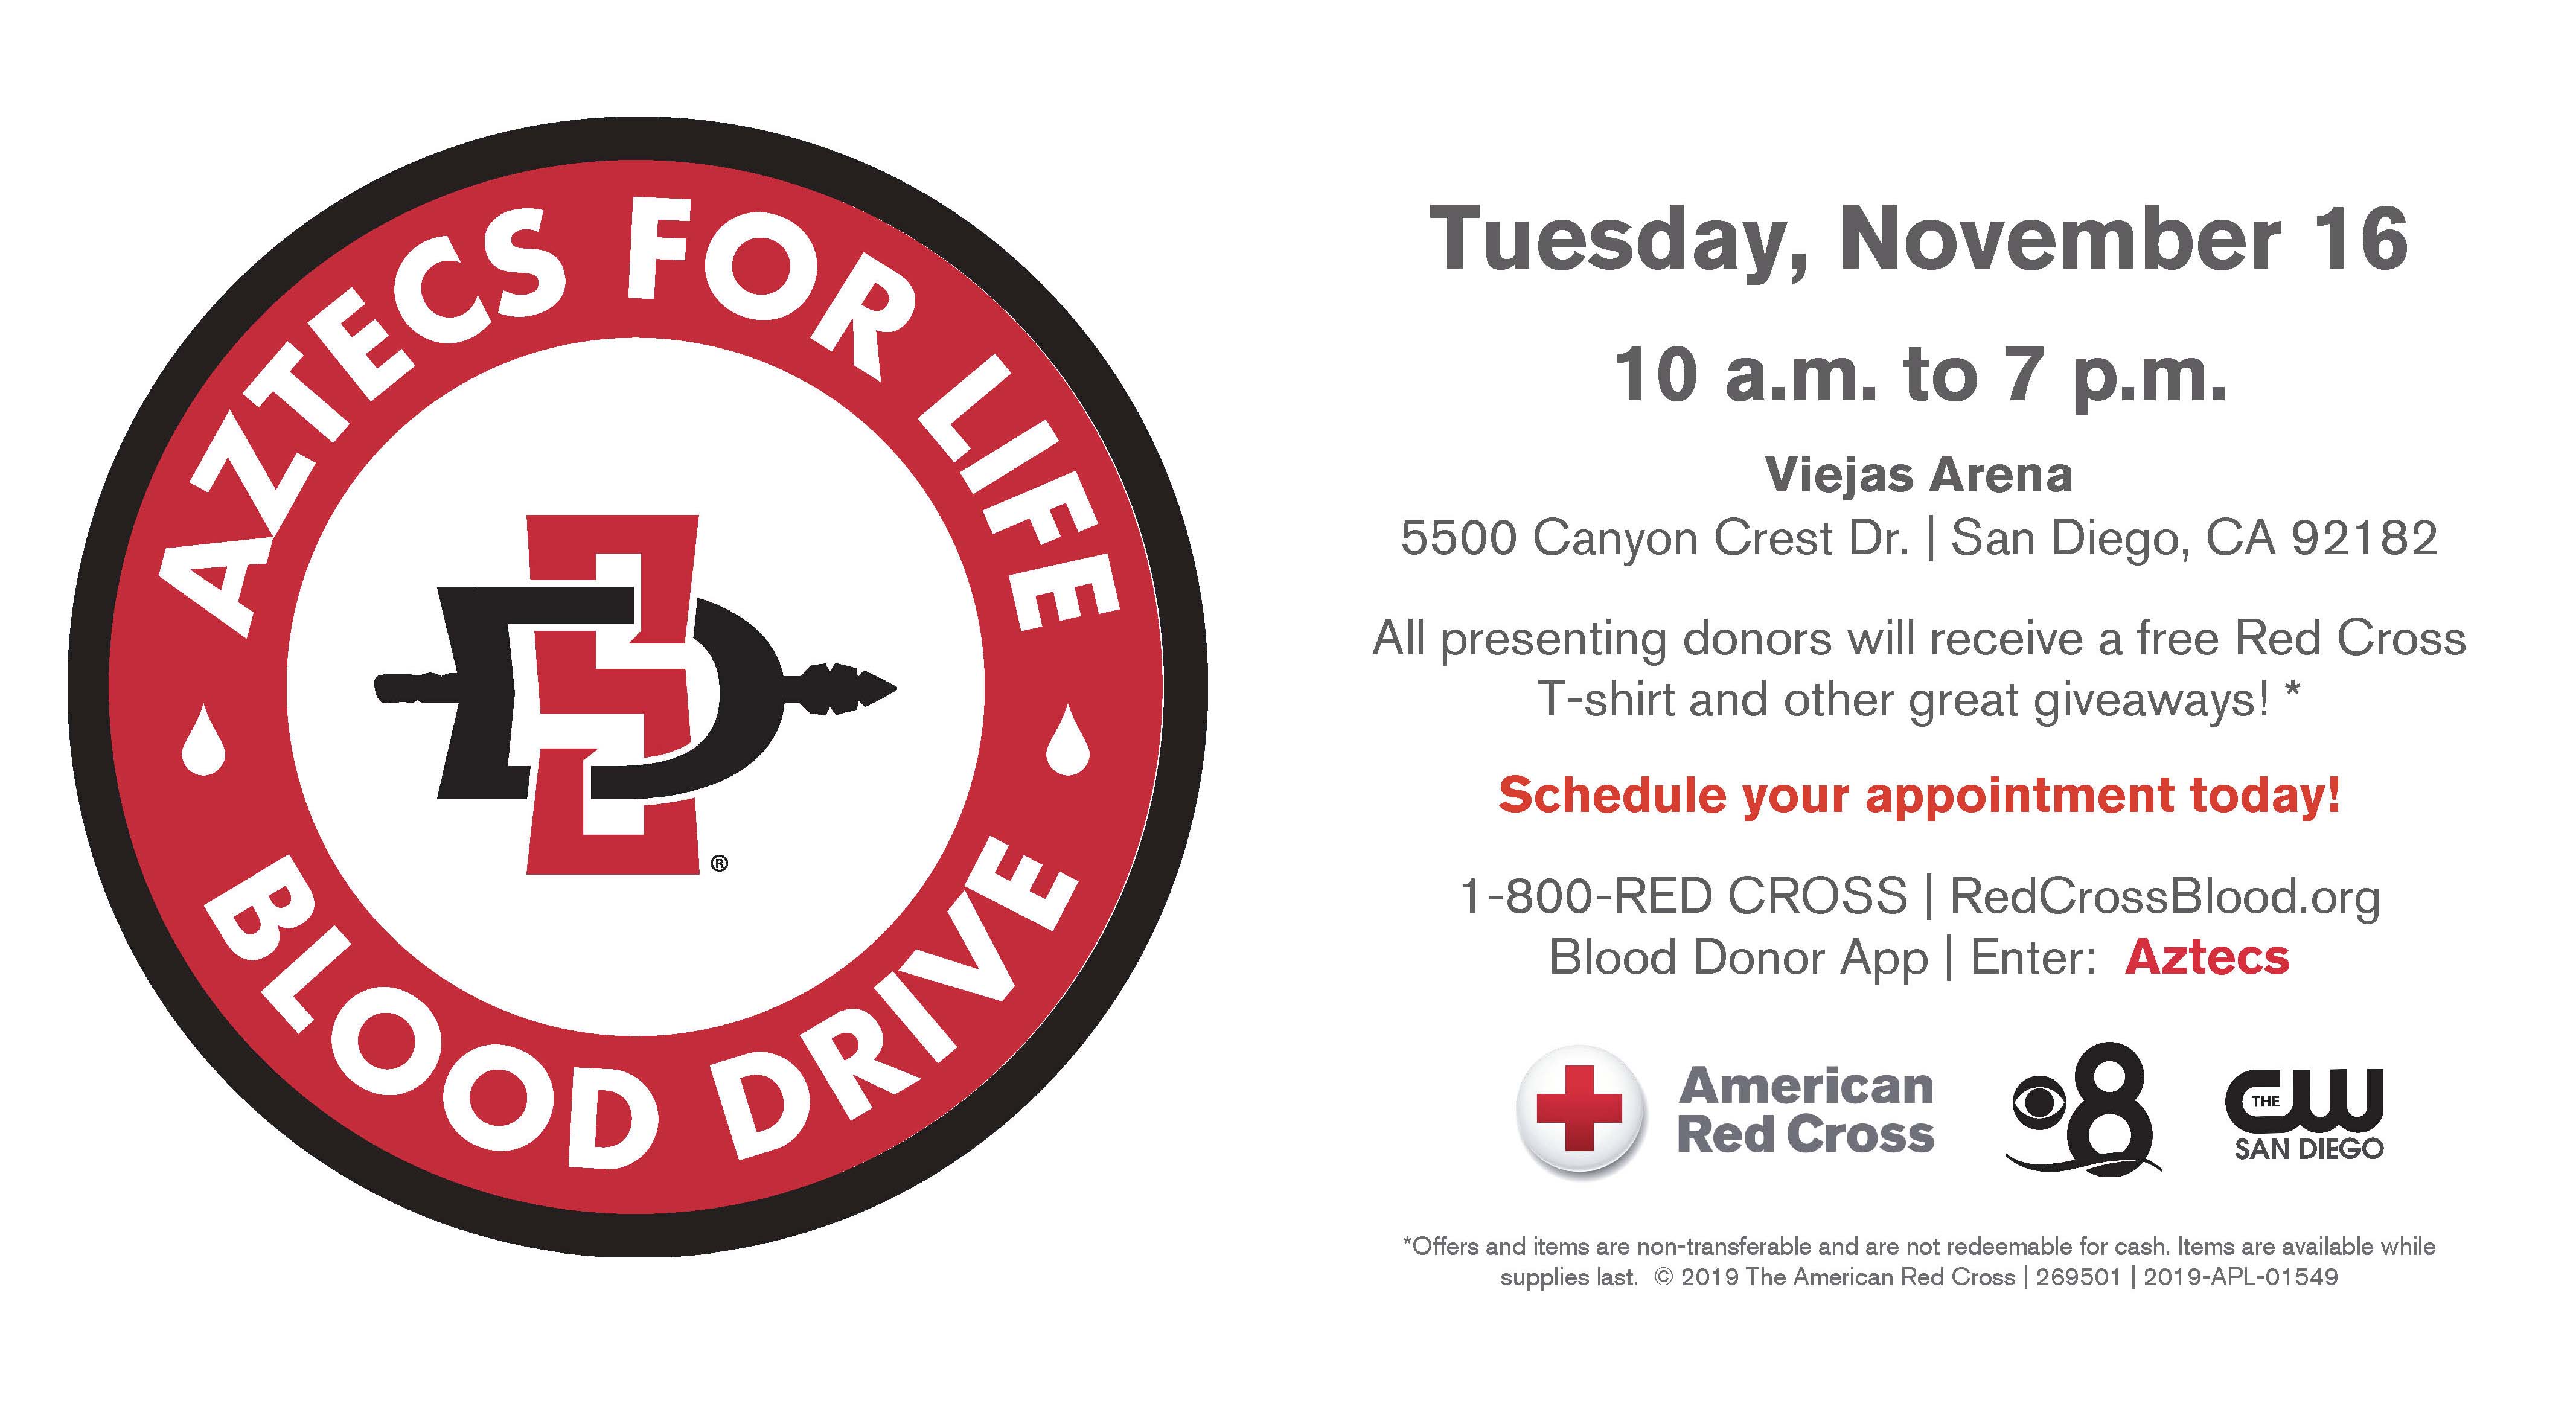 The Aztecs for Life Blood Drive is Nov. 16 at Viejas Arena. Pictured above, additional information on how to schedule an appointment.